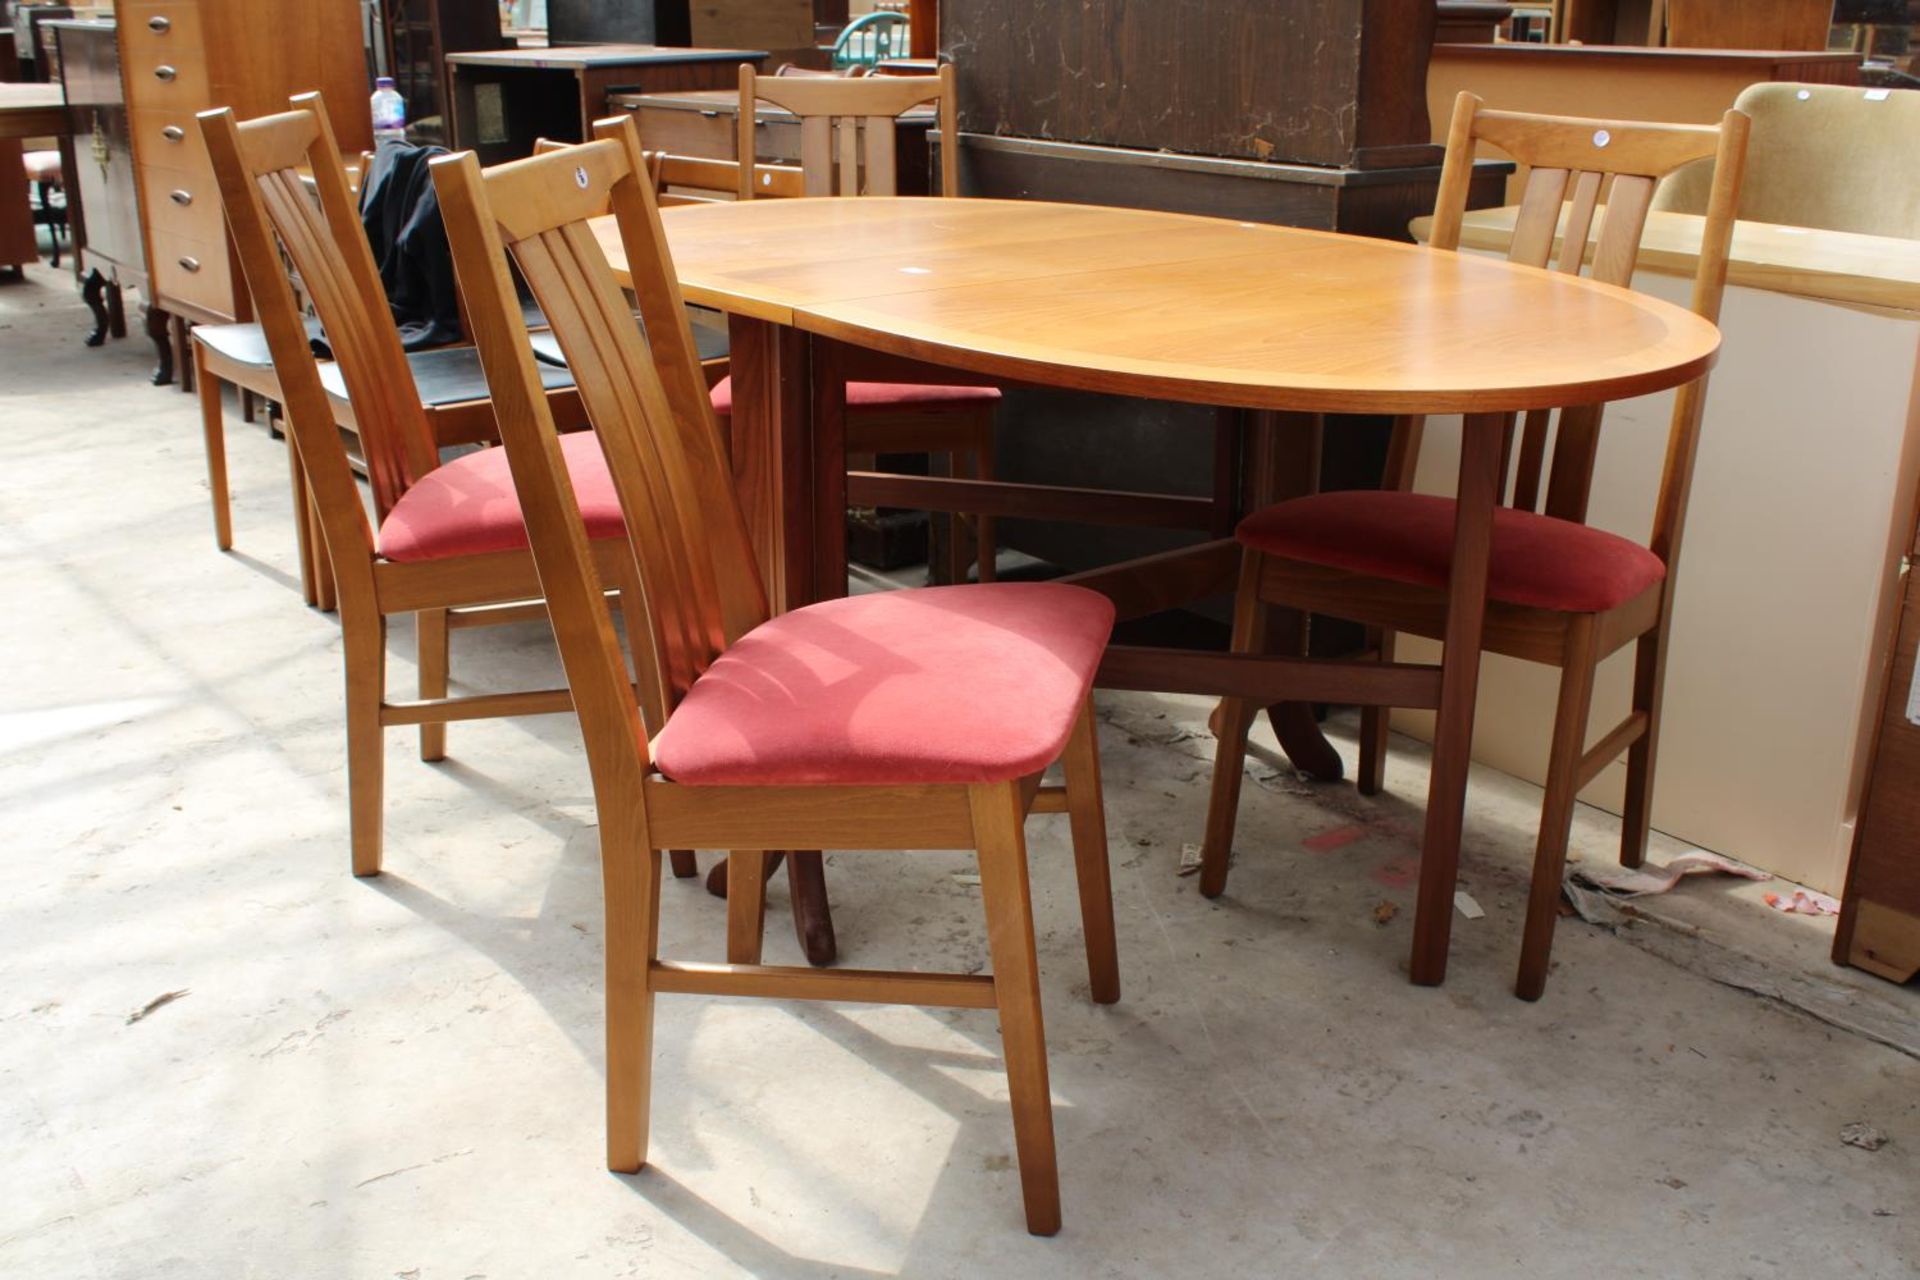 A RETRO TEAK GATE-LEG DINING TABLE AND 4 CHAIRS, 63" X 36" OPENED - Image 2 of 5